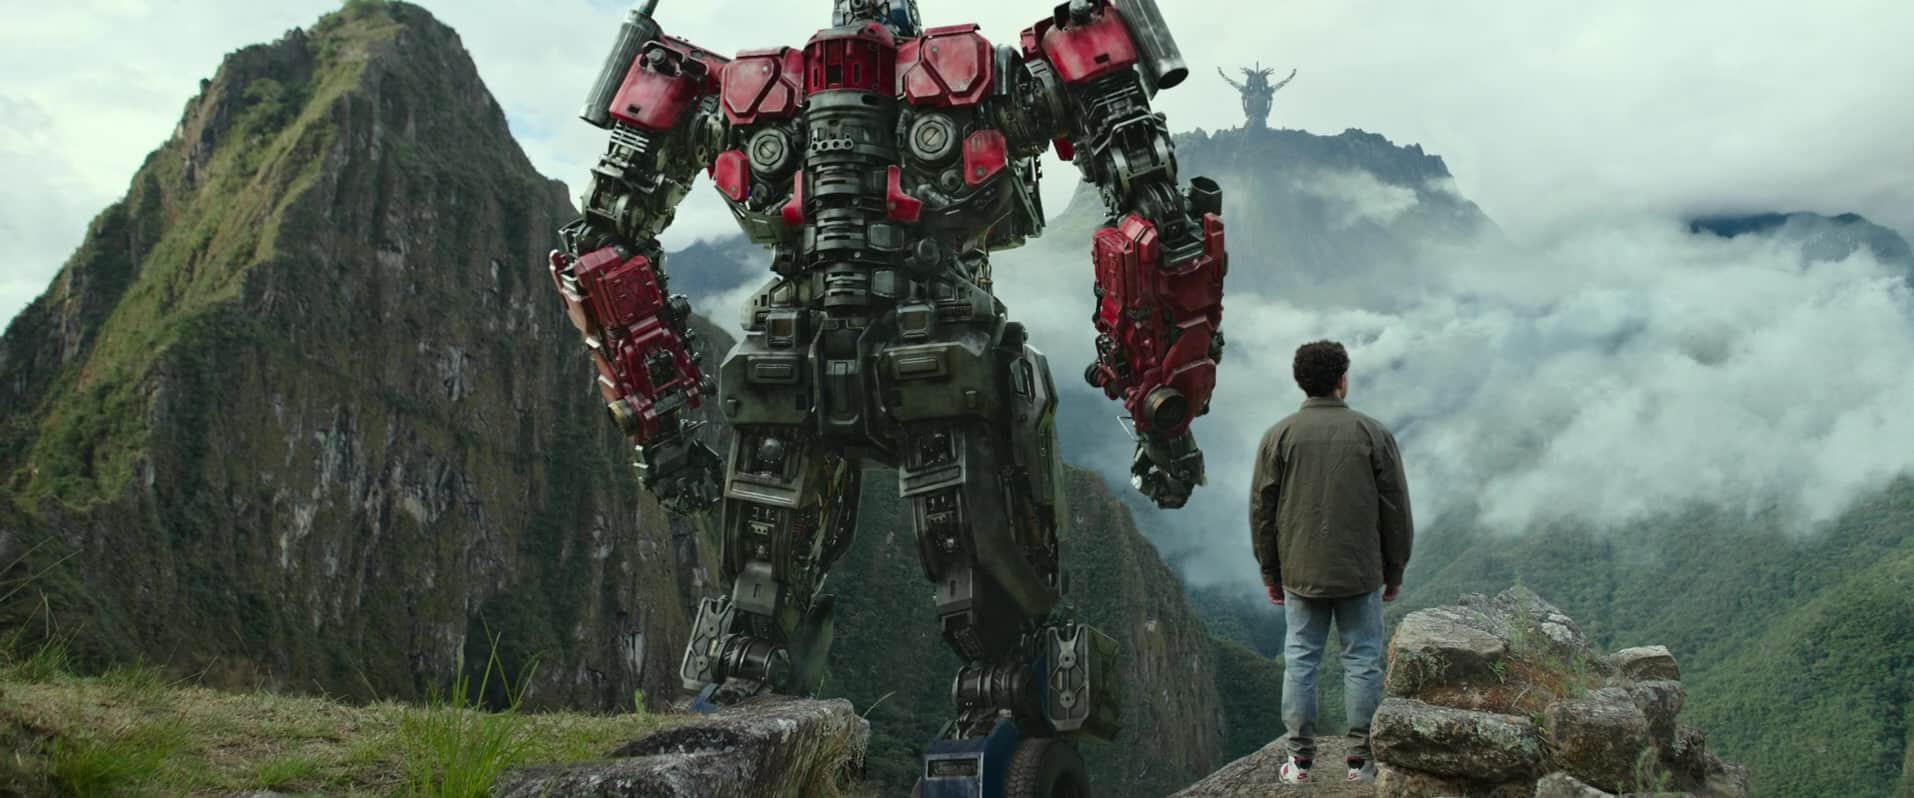 A Transformer and a man look down at clouds from a mountaintop in this photo from Di Bonaventura Pictures.